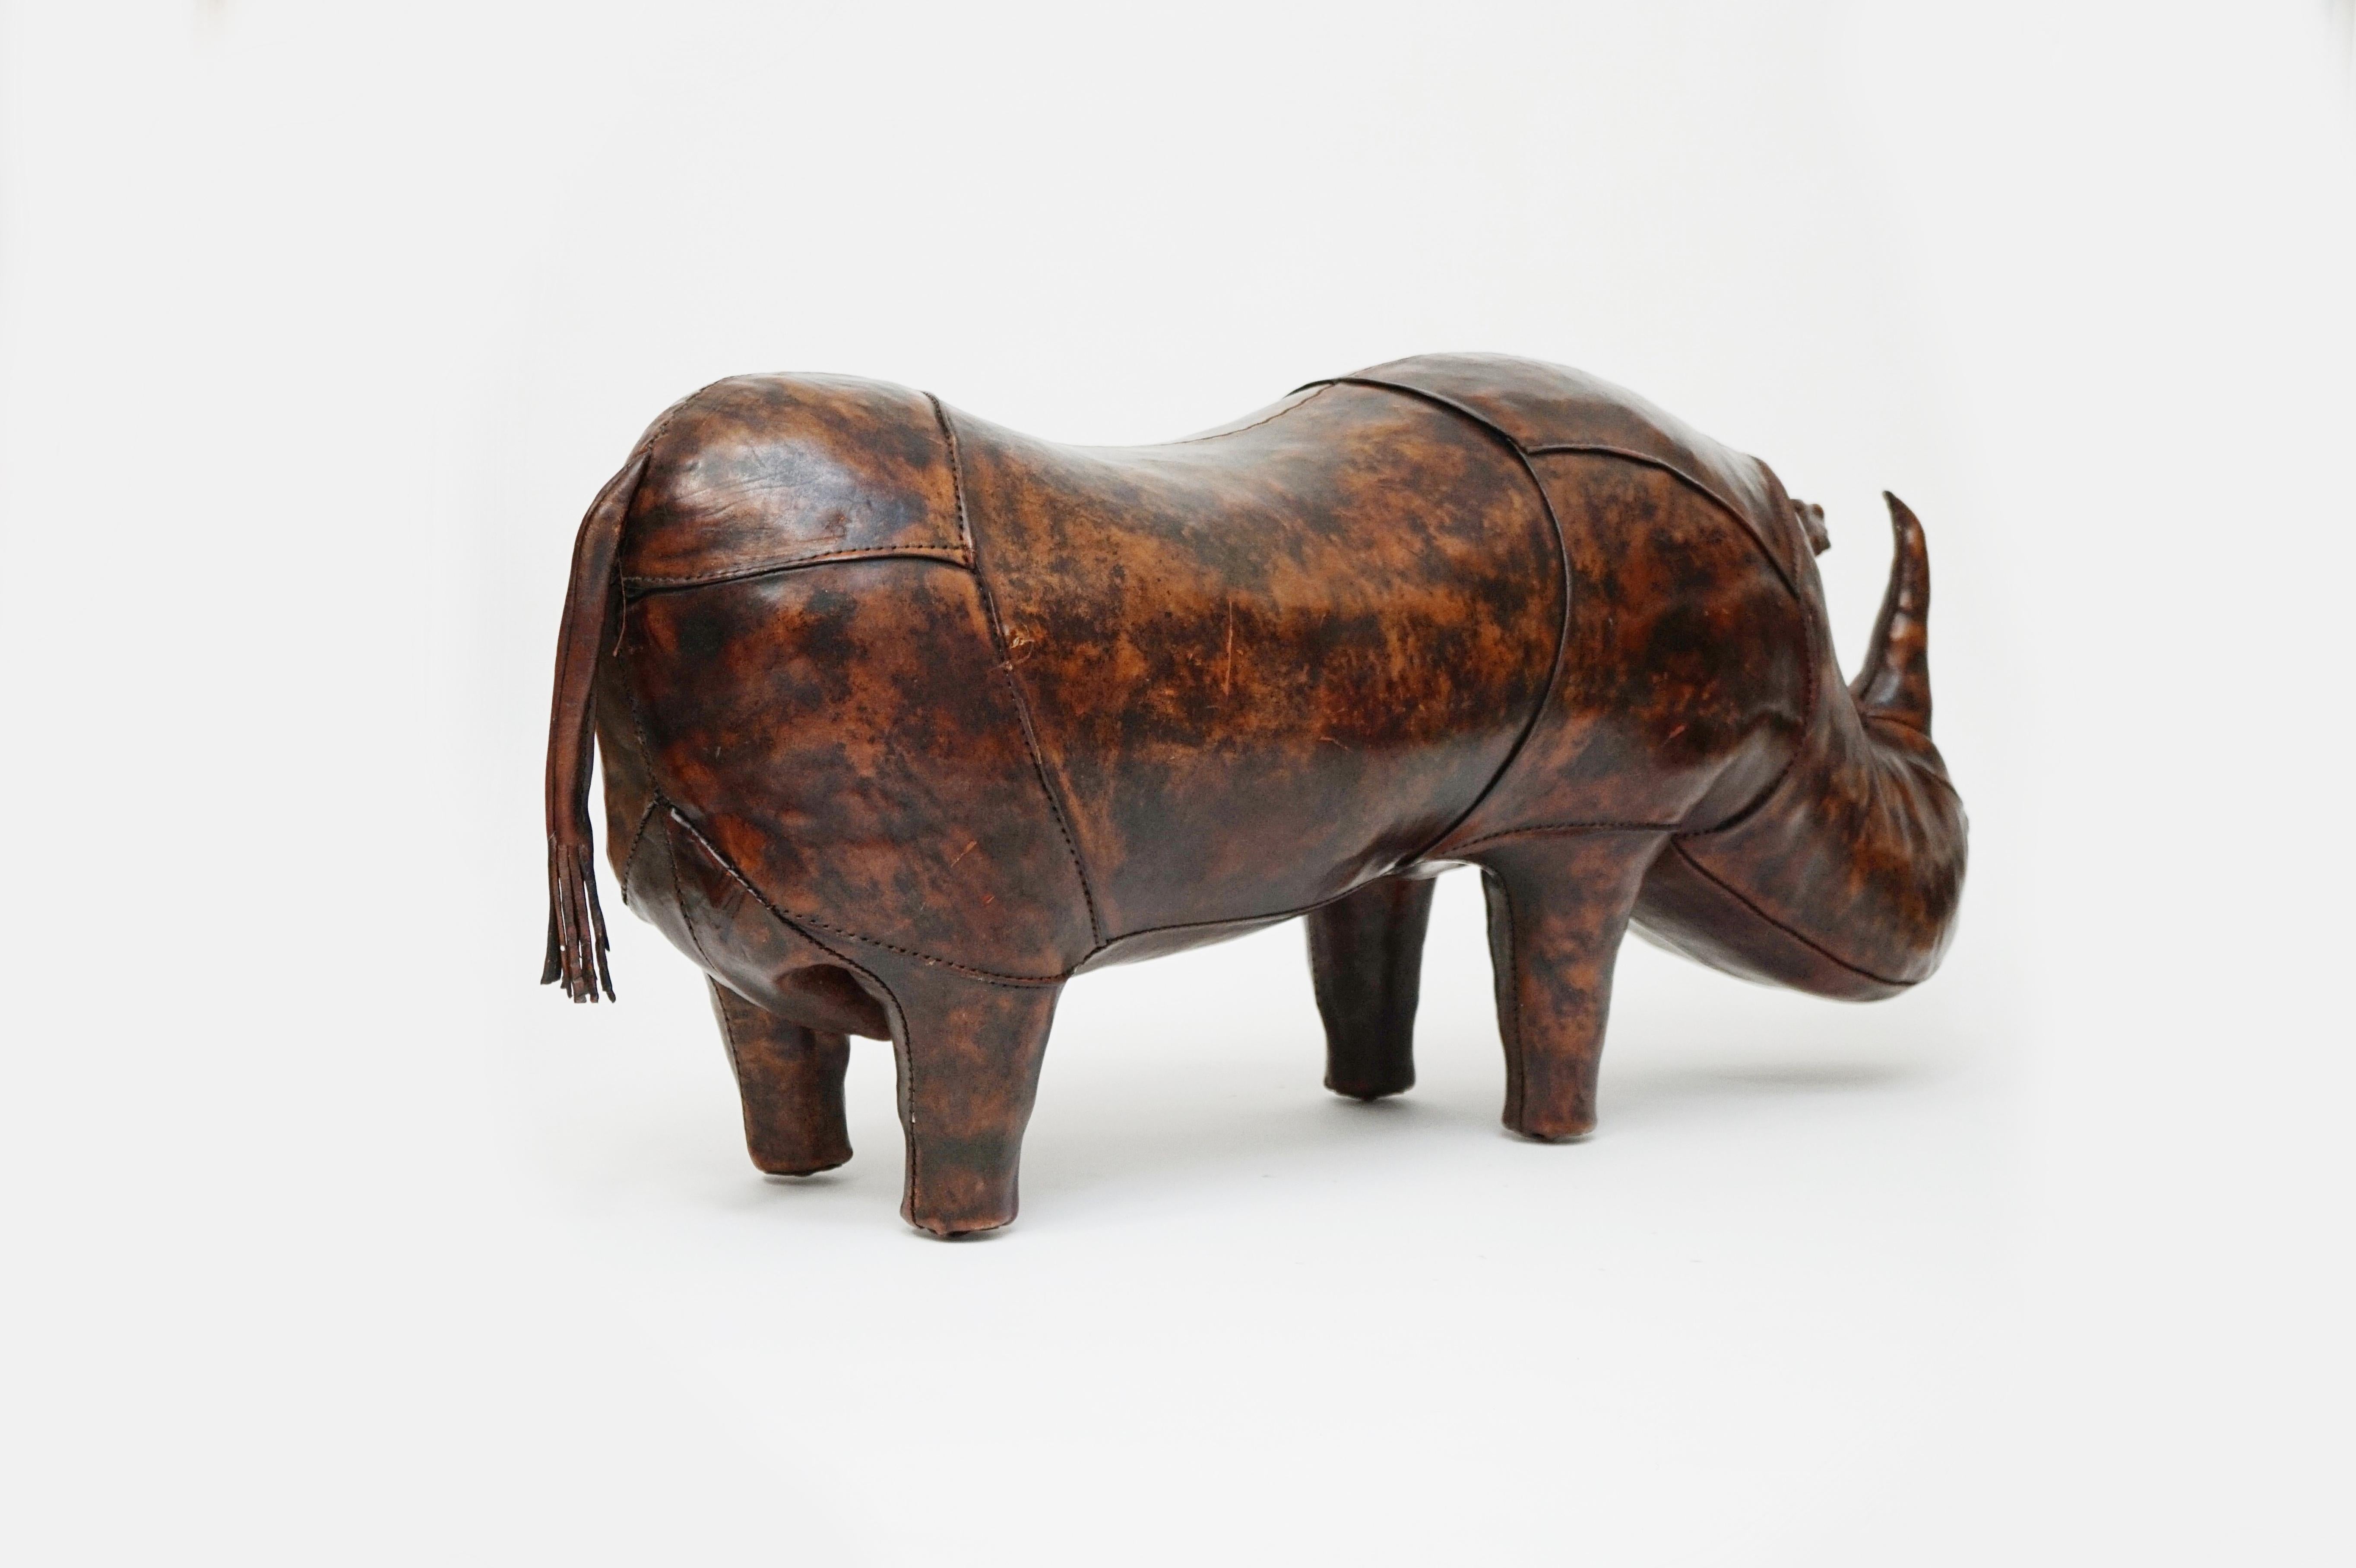 Patinated Leather Rhino Stool by Dimitri Omersa for Abercrombie & Fitch, Signed